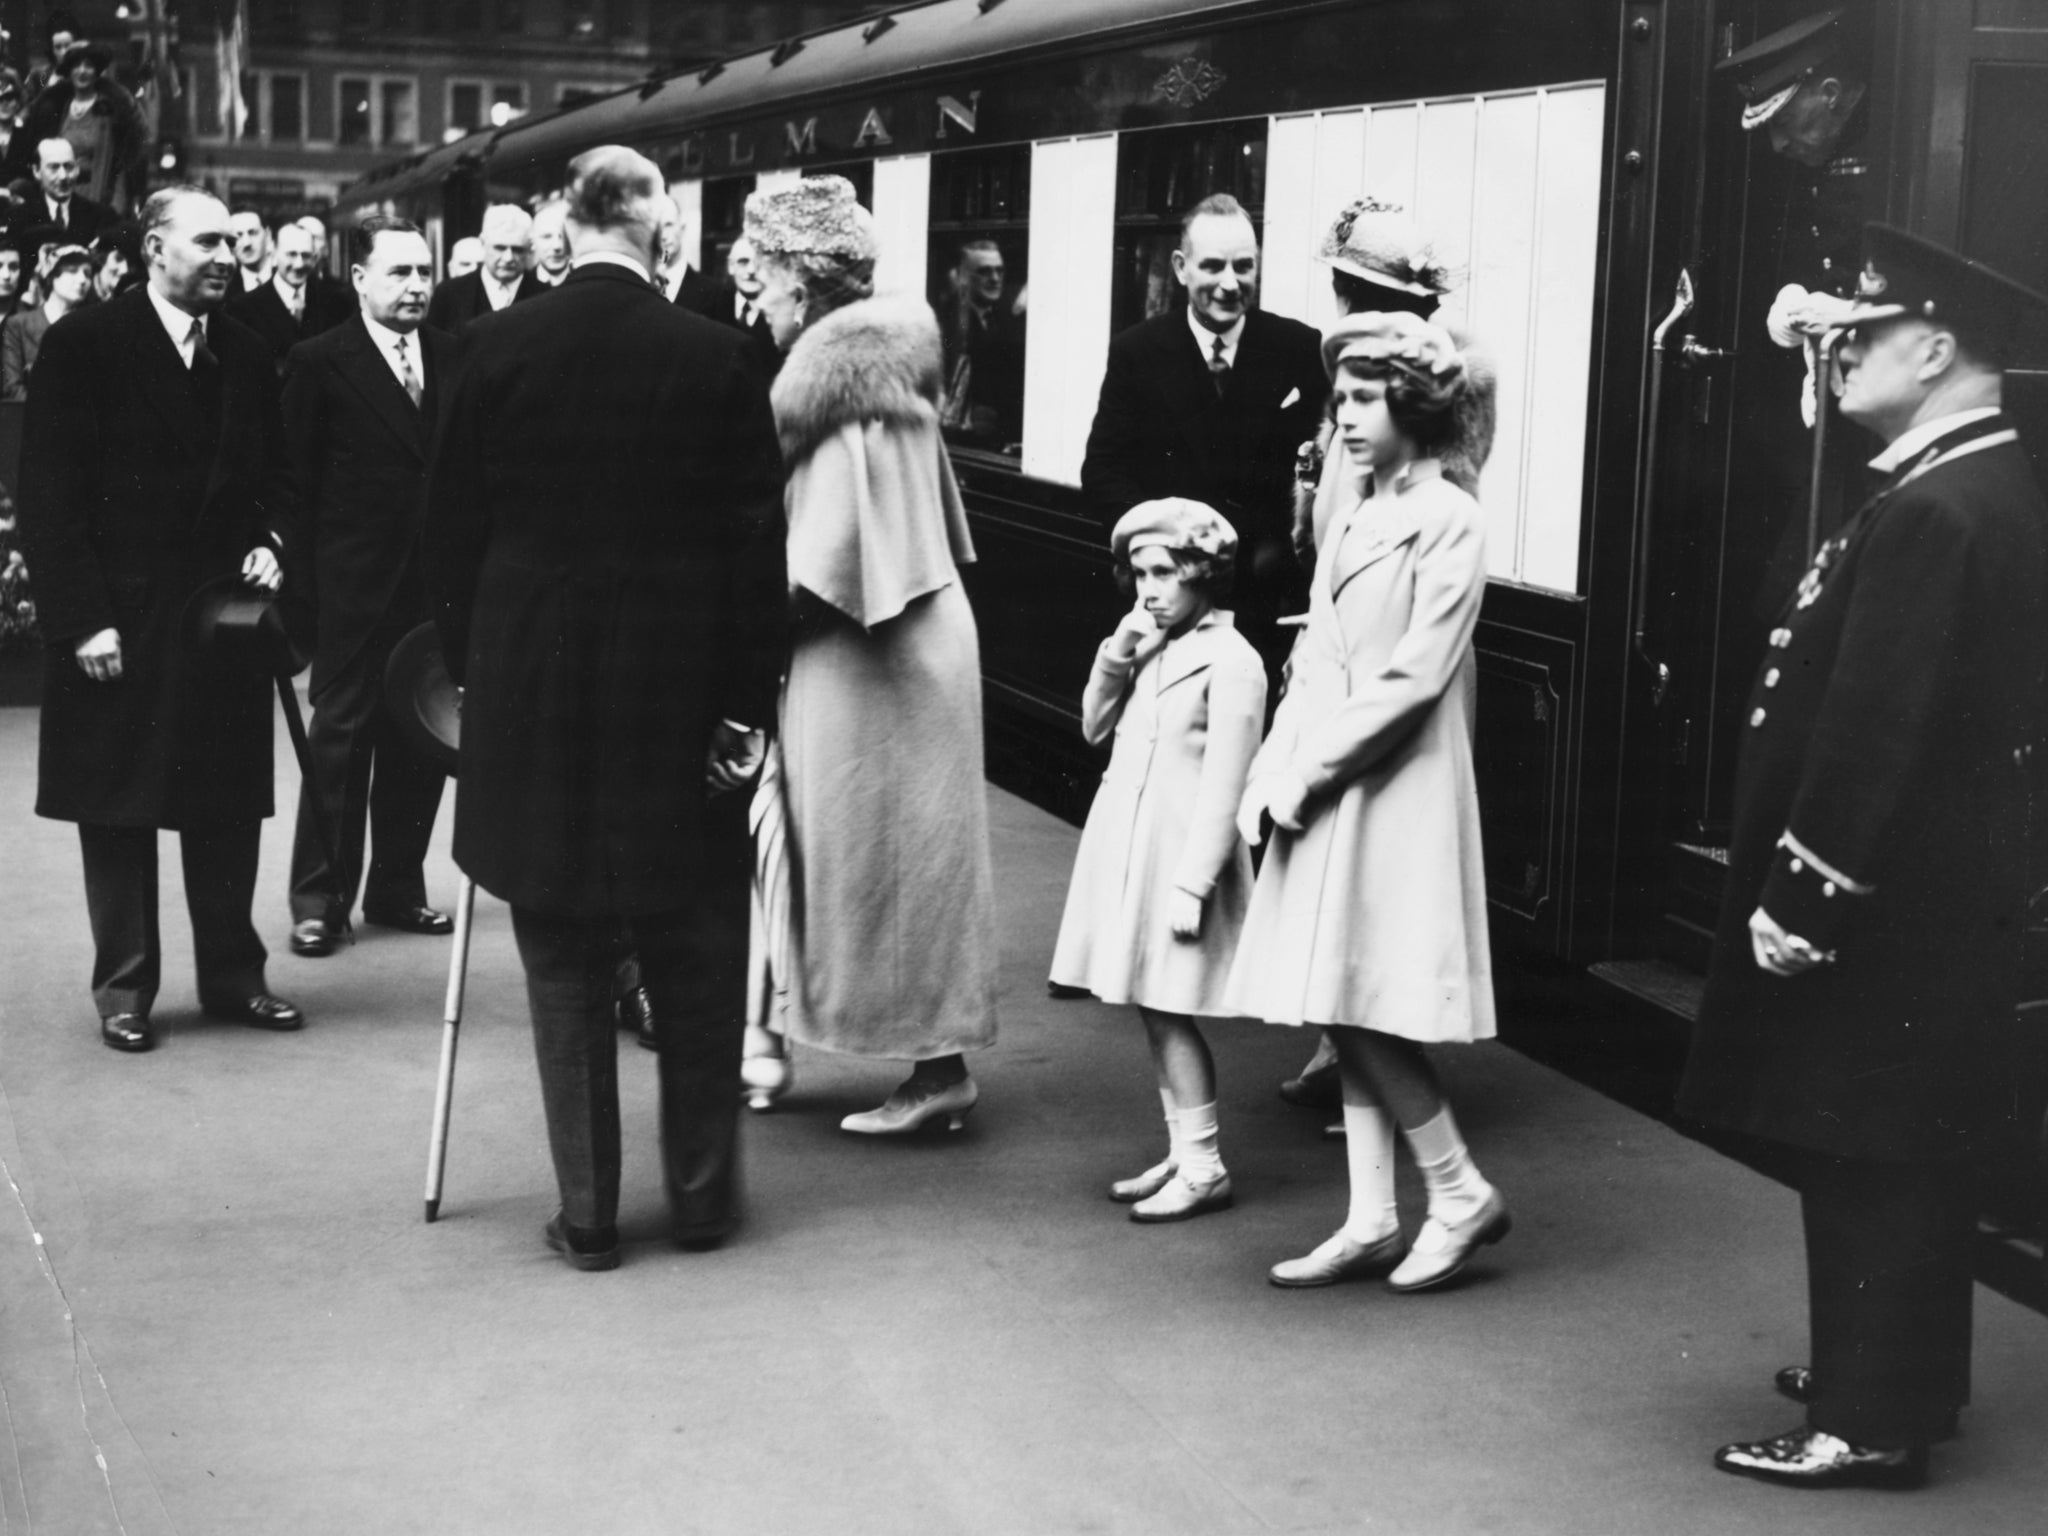 Elizabeth and her sister arrive at Waterloo station in 1939 to say goodbye to their parents as they leave to tour Canada